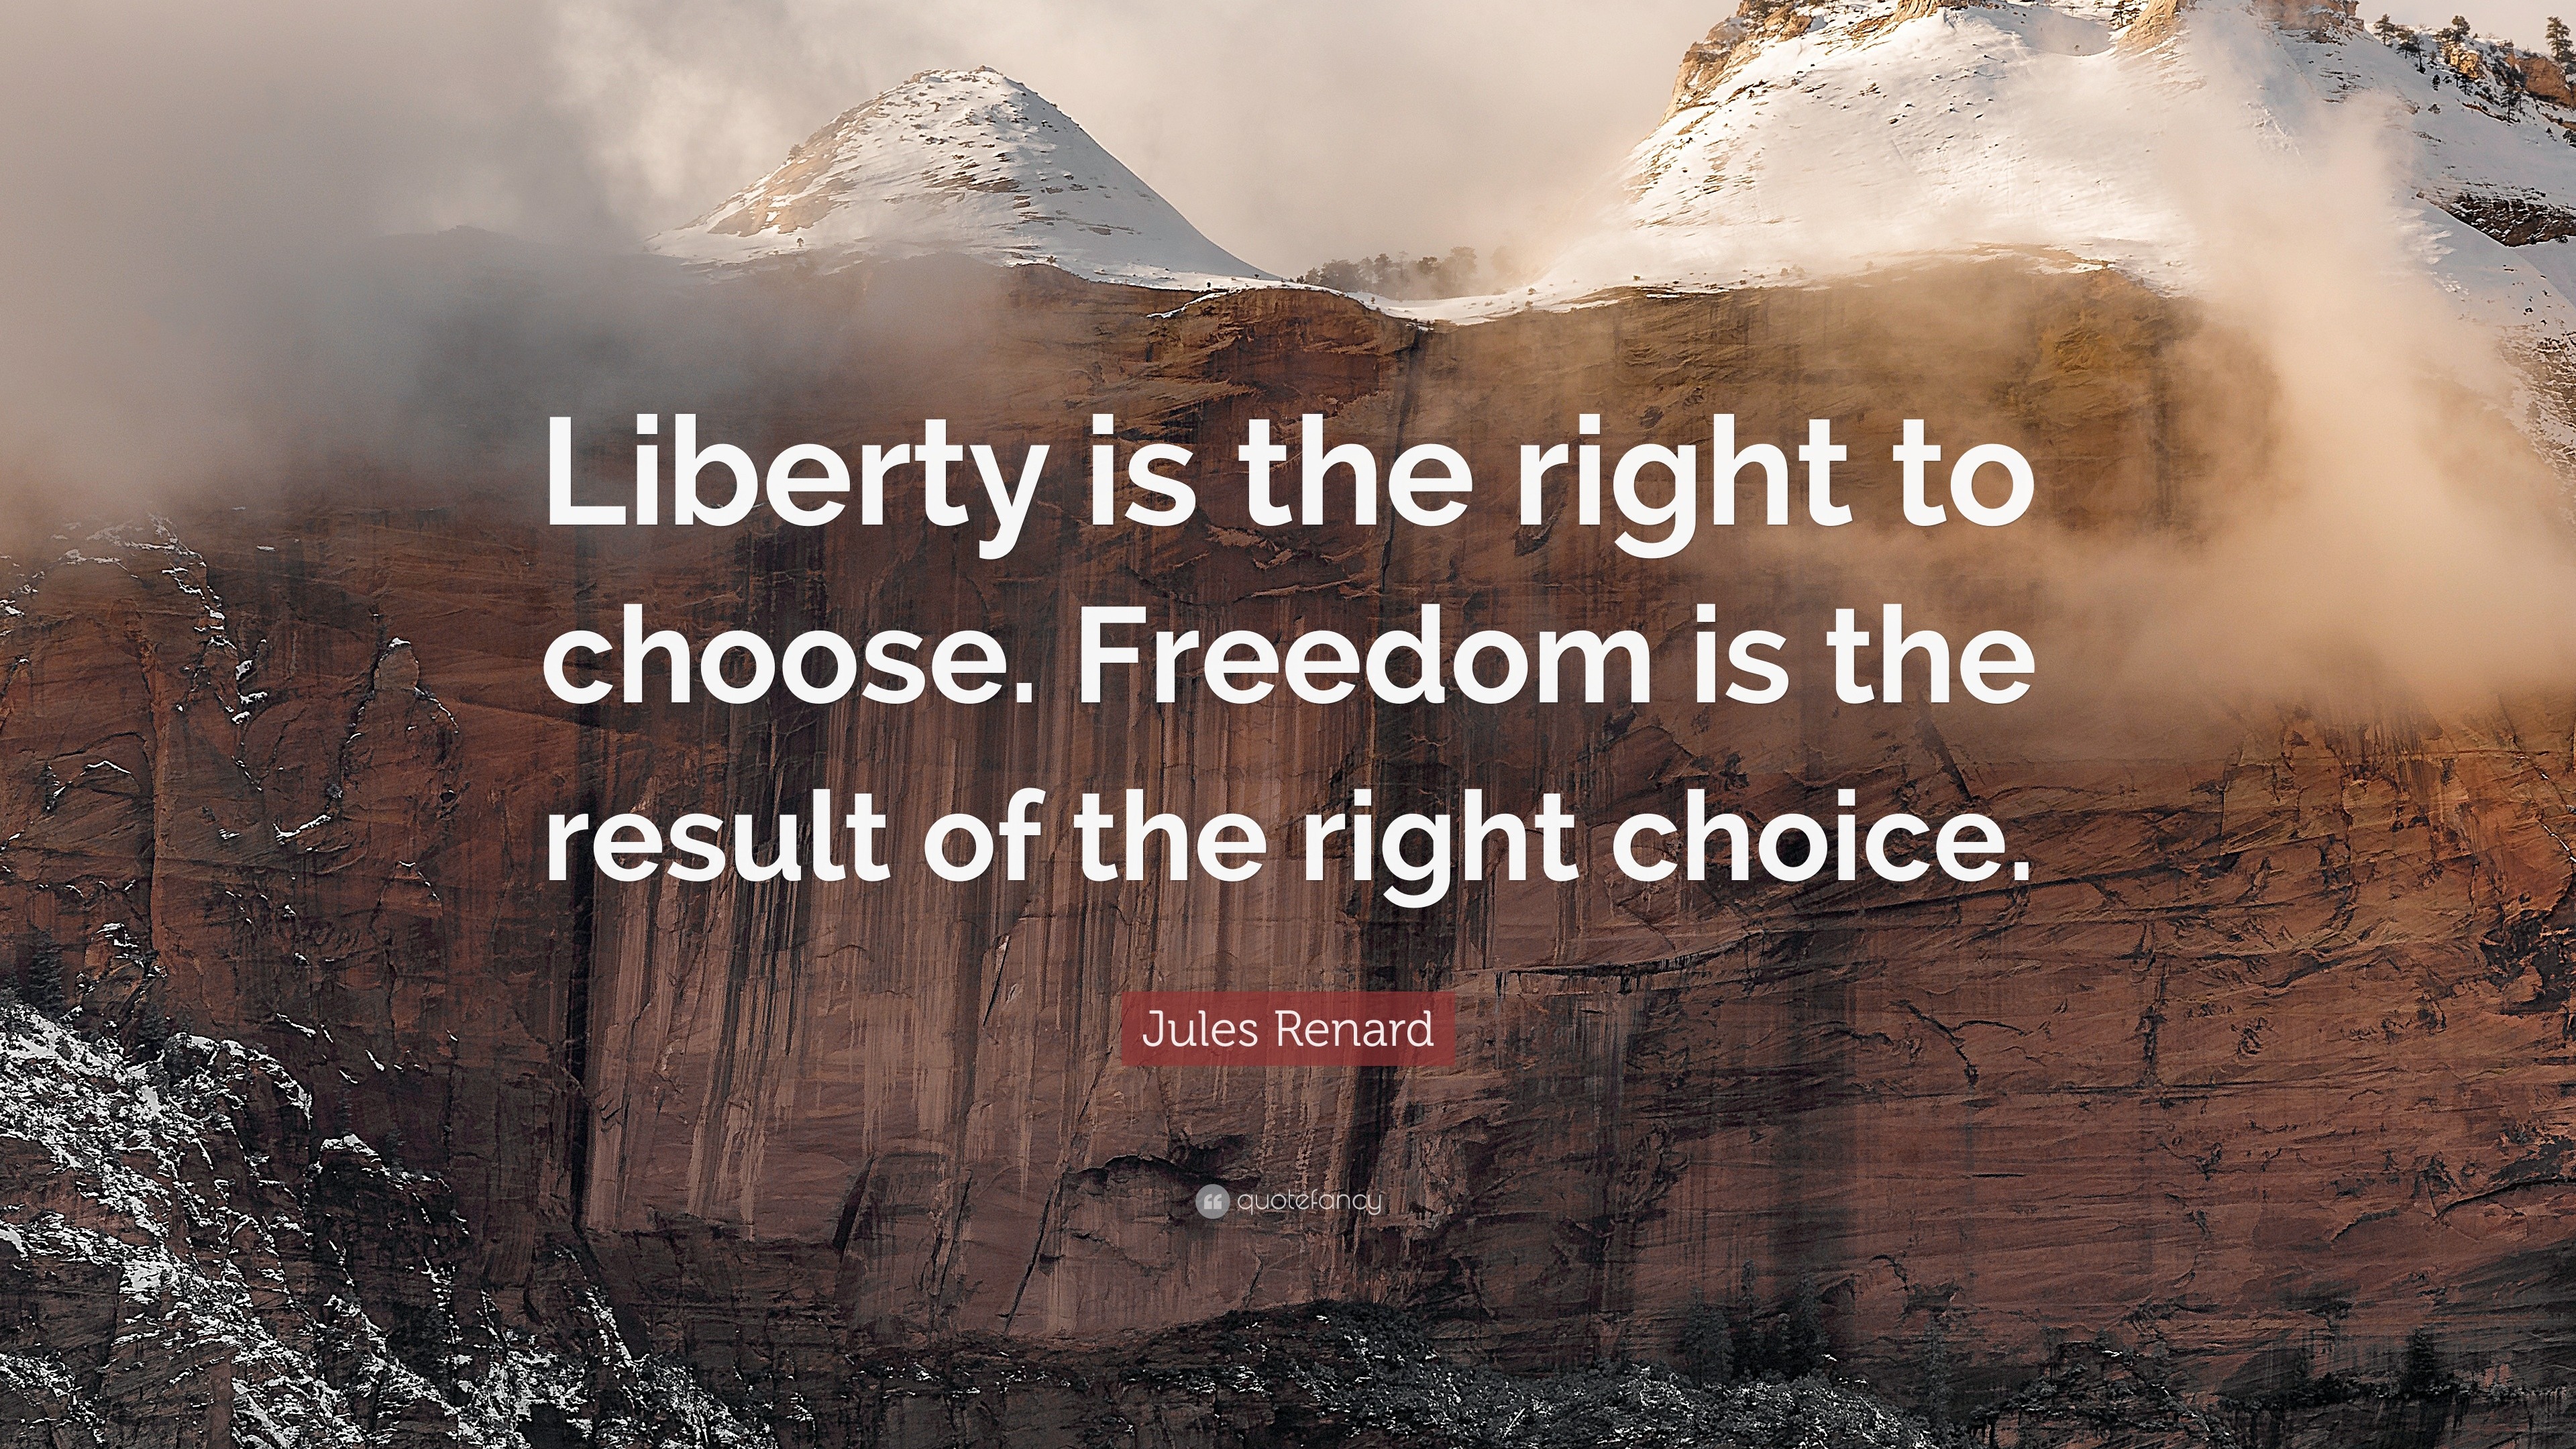 Jules Renard Quote: “Liberty is the right to choose. Freedom is the result of the right